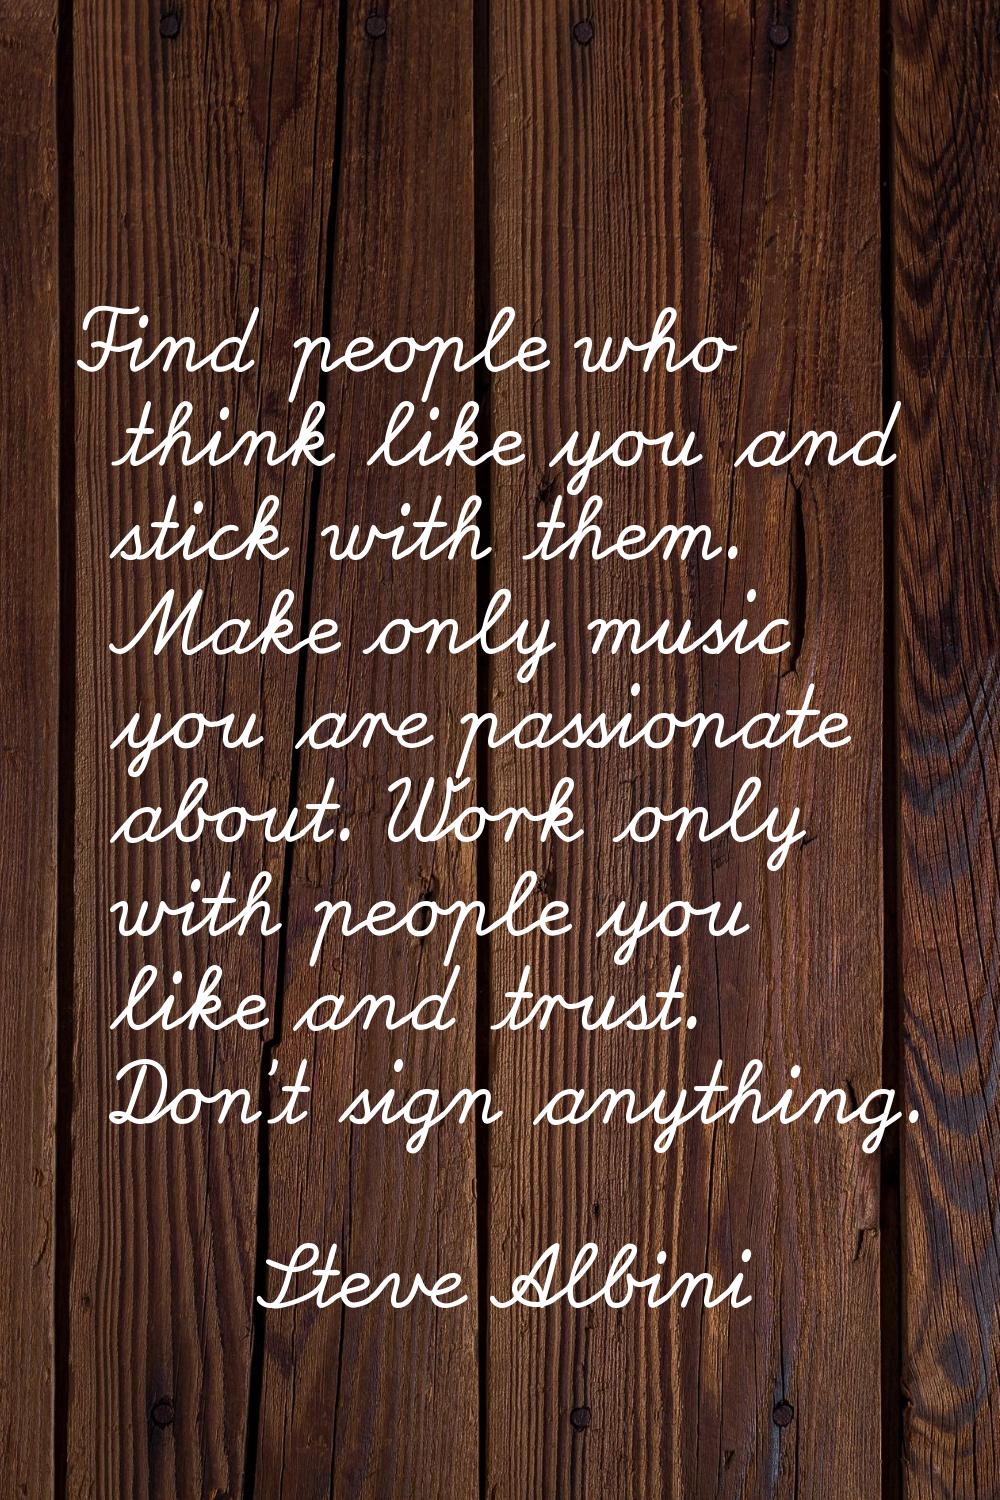 Find people who think like you and stick with them. Make only music you are passionate about. Work 